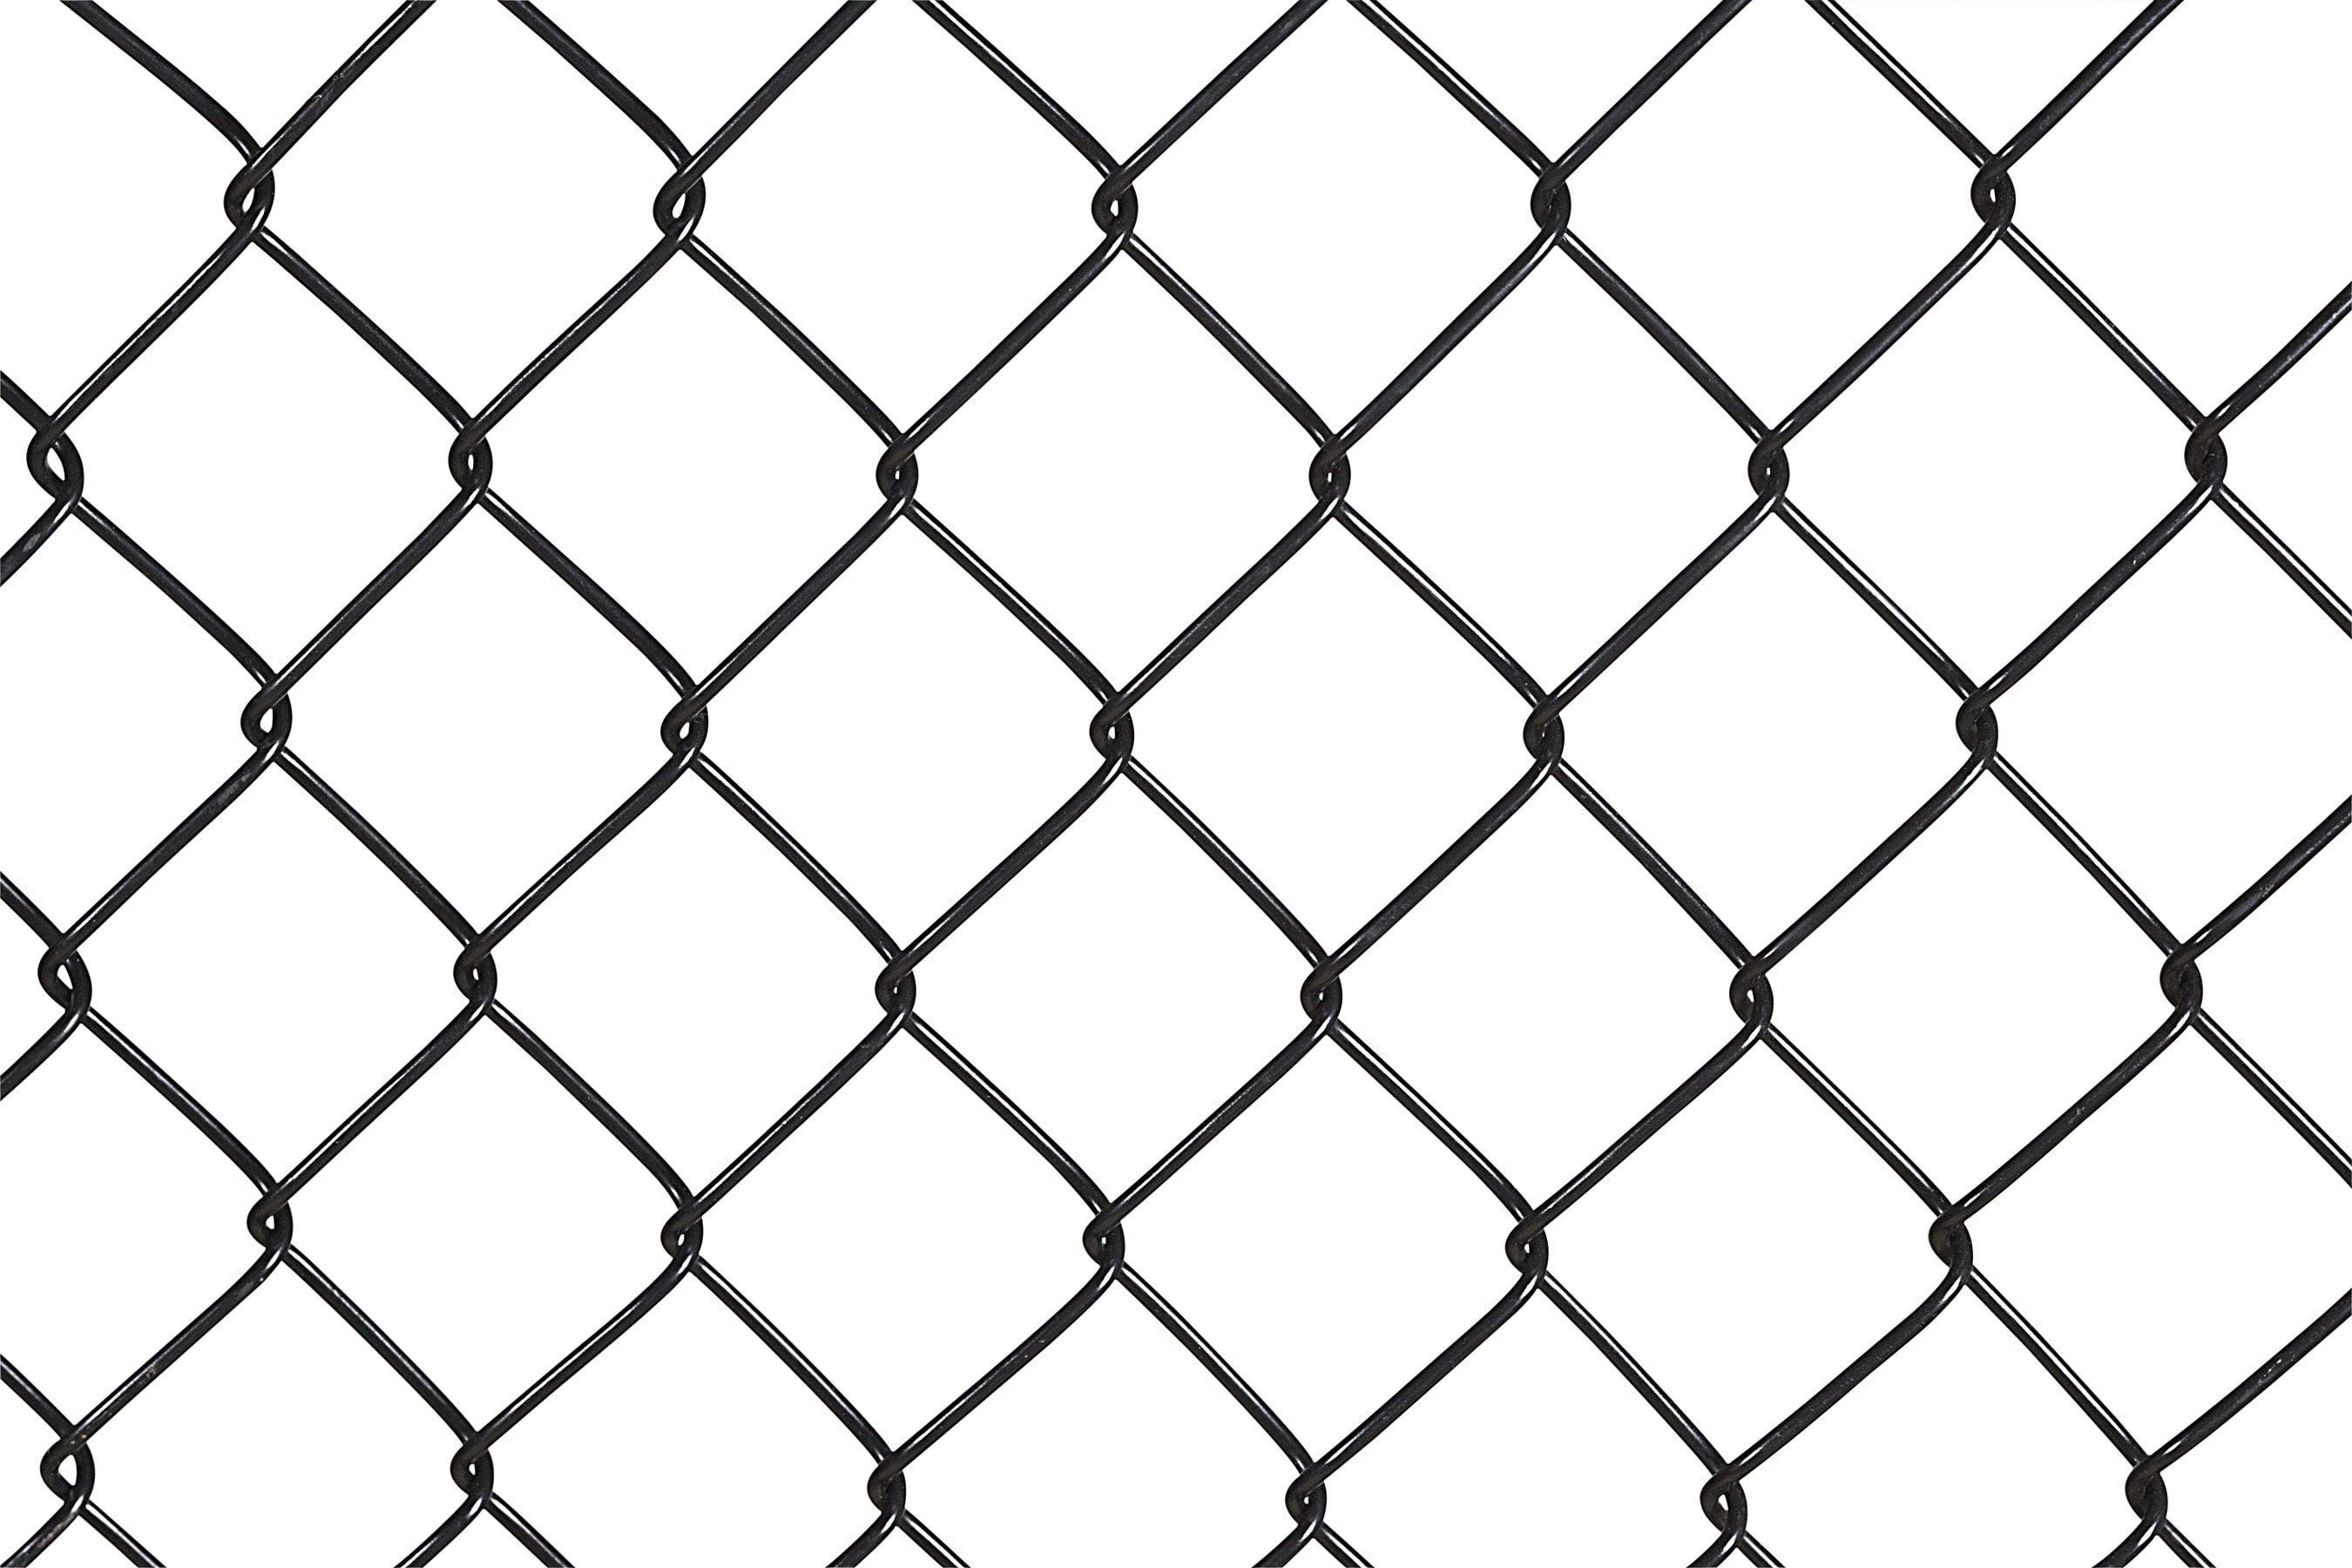 4-ft H x 50-ft W 9-Gauge Vinyl Coated Steel Chain Link Fence Fabric with Mesh Size 2-in in the Chain Link Fencing department at Lowes.com